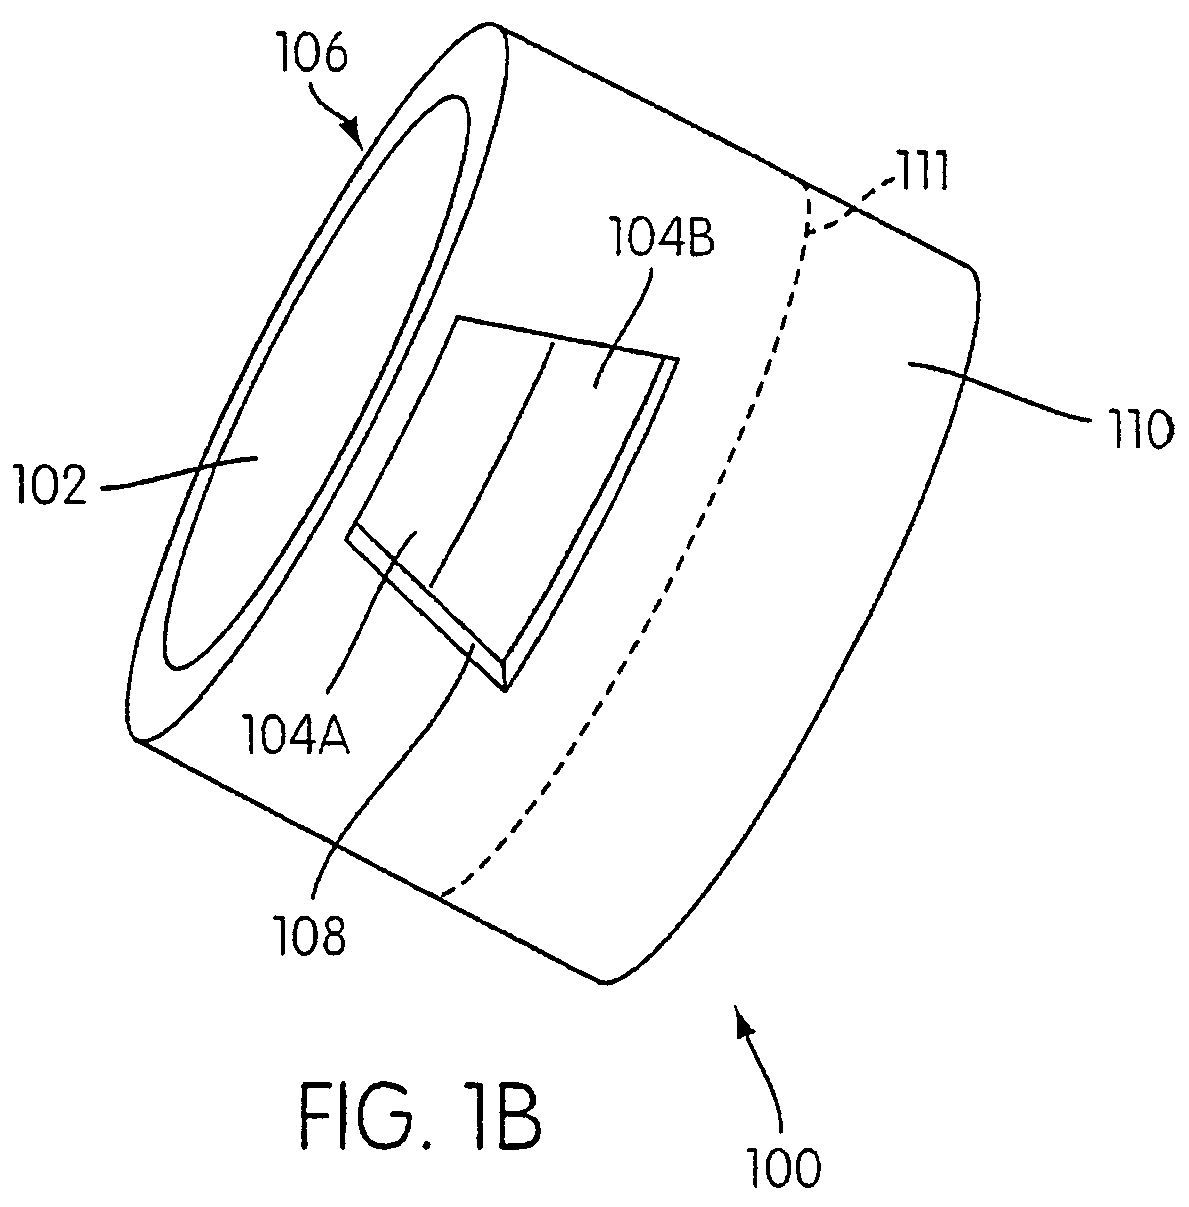 Vent and/or diverter assembly for use in breathing apparatus